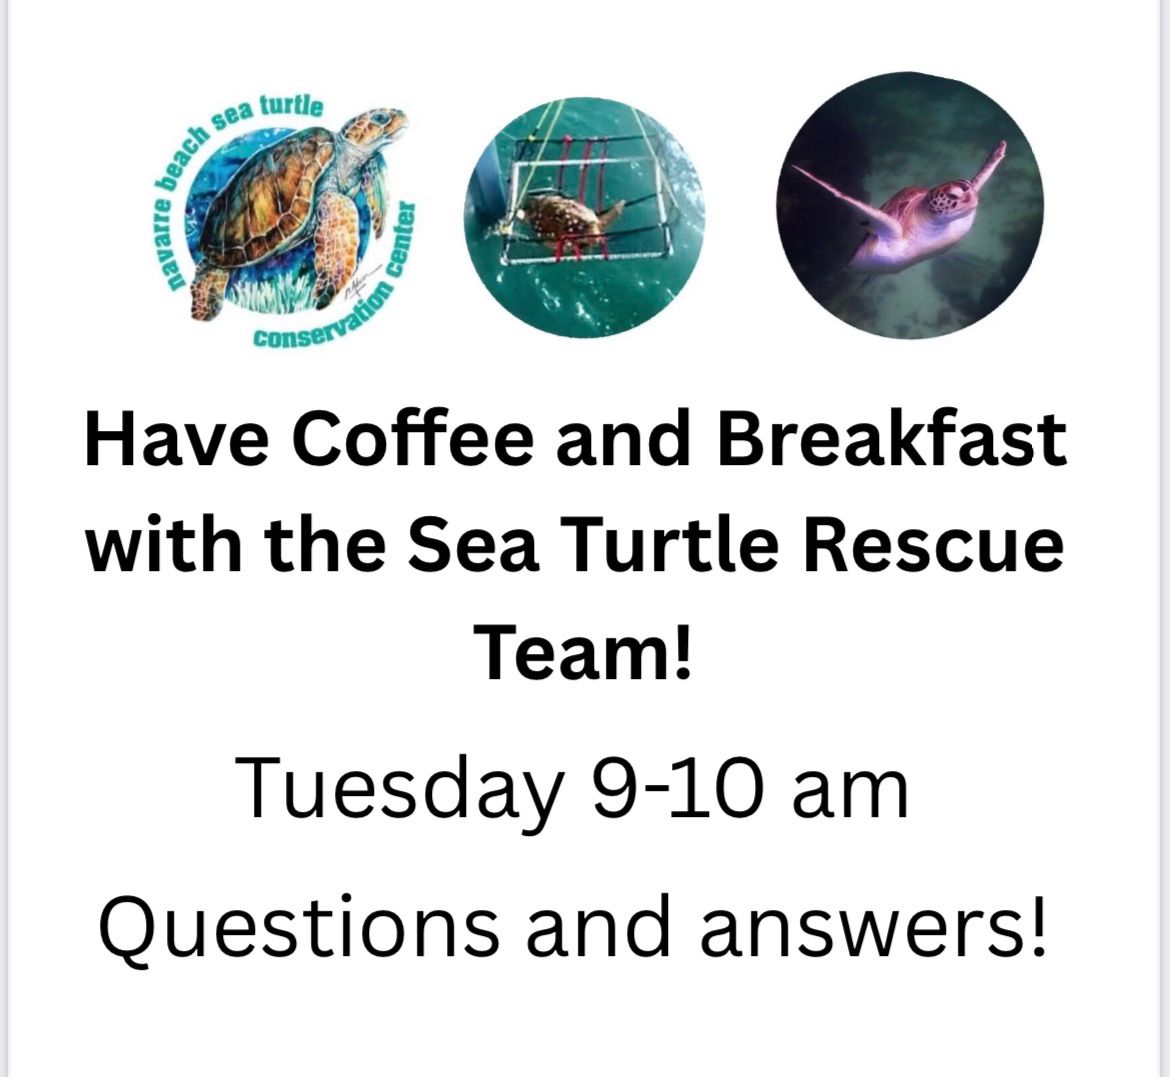 Turtle Tuesday with Sea Turtle Rescue Team